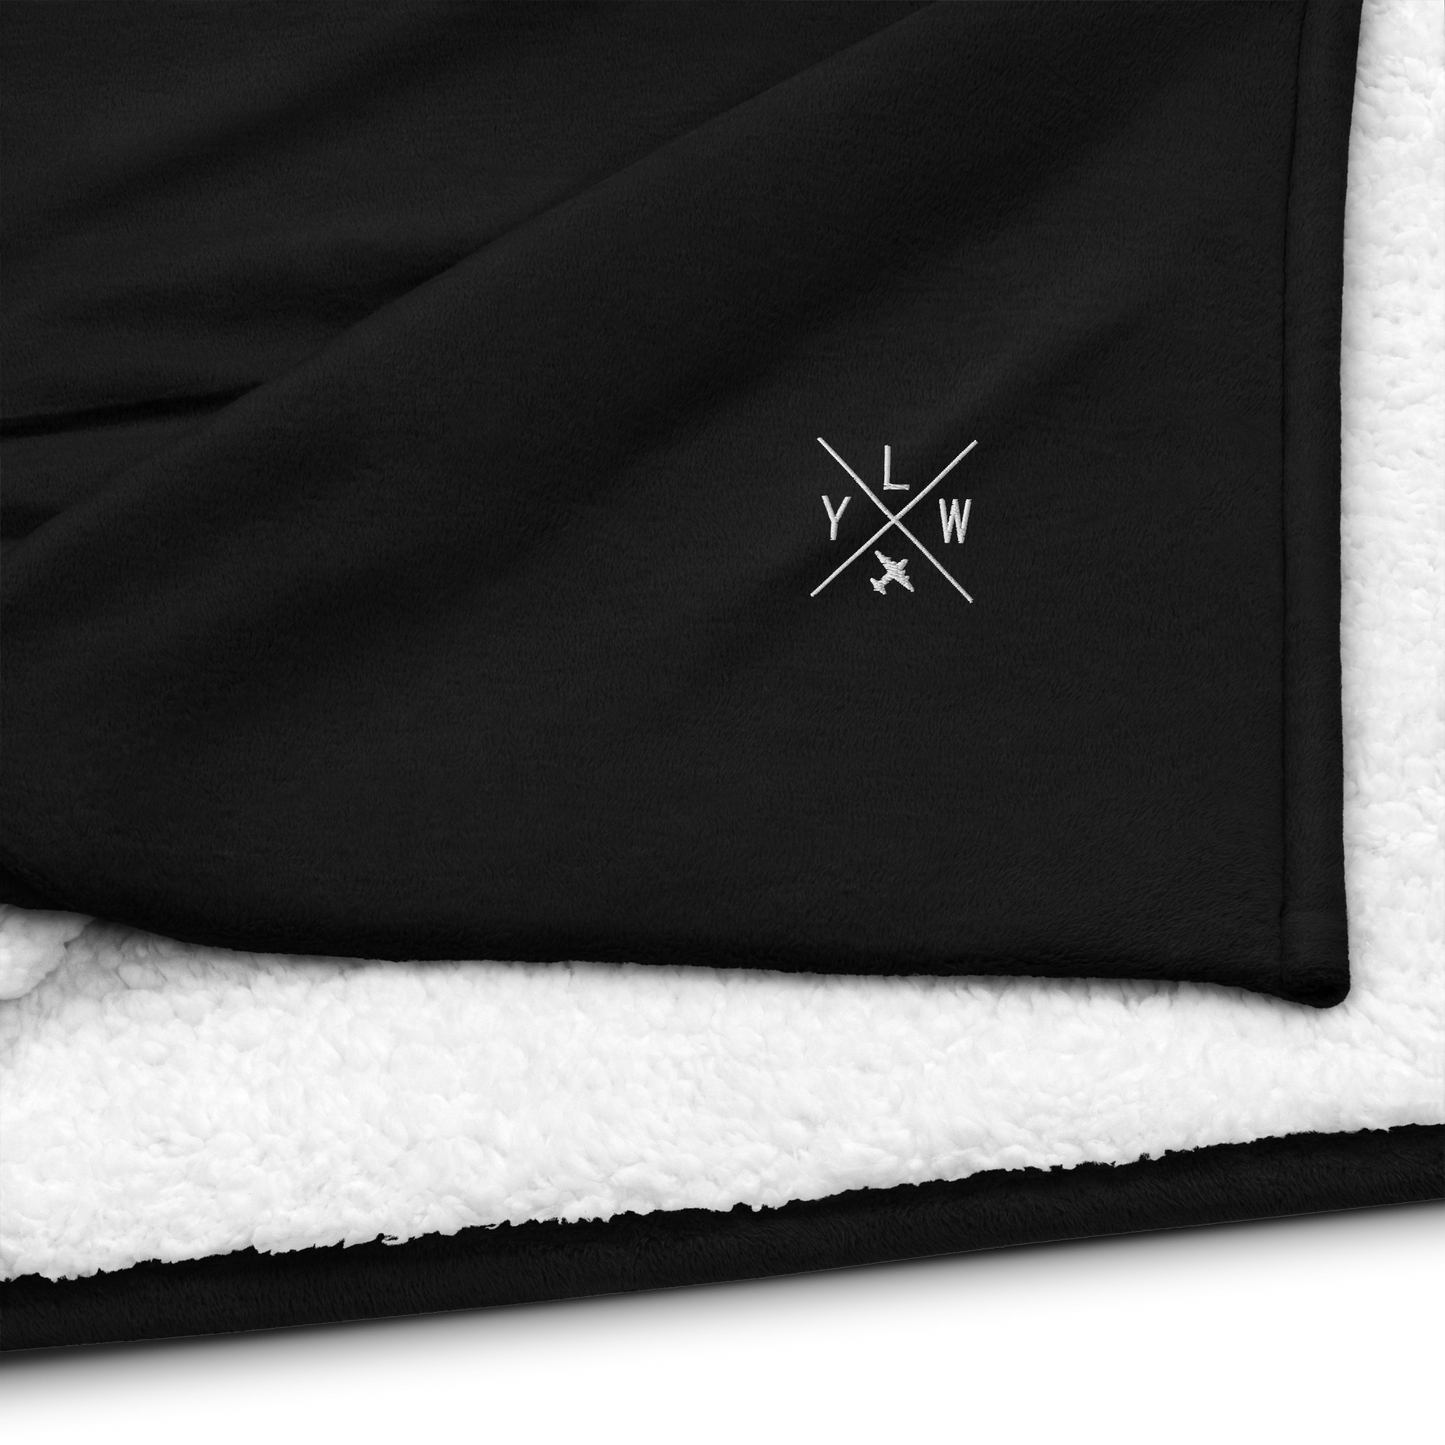 YHM Designs - YLW Kelowna Premium Sherpa Blanket - Crossed-X Design with Airport Code and Vintage Propliner - White Embroidery - Image 03